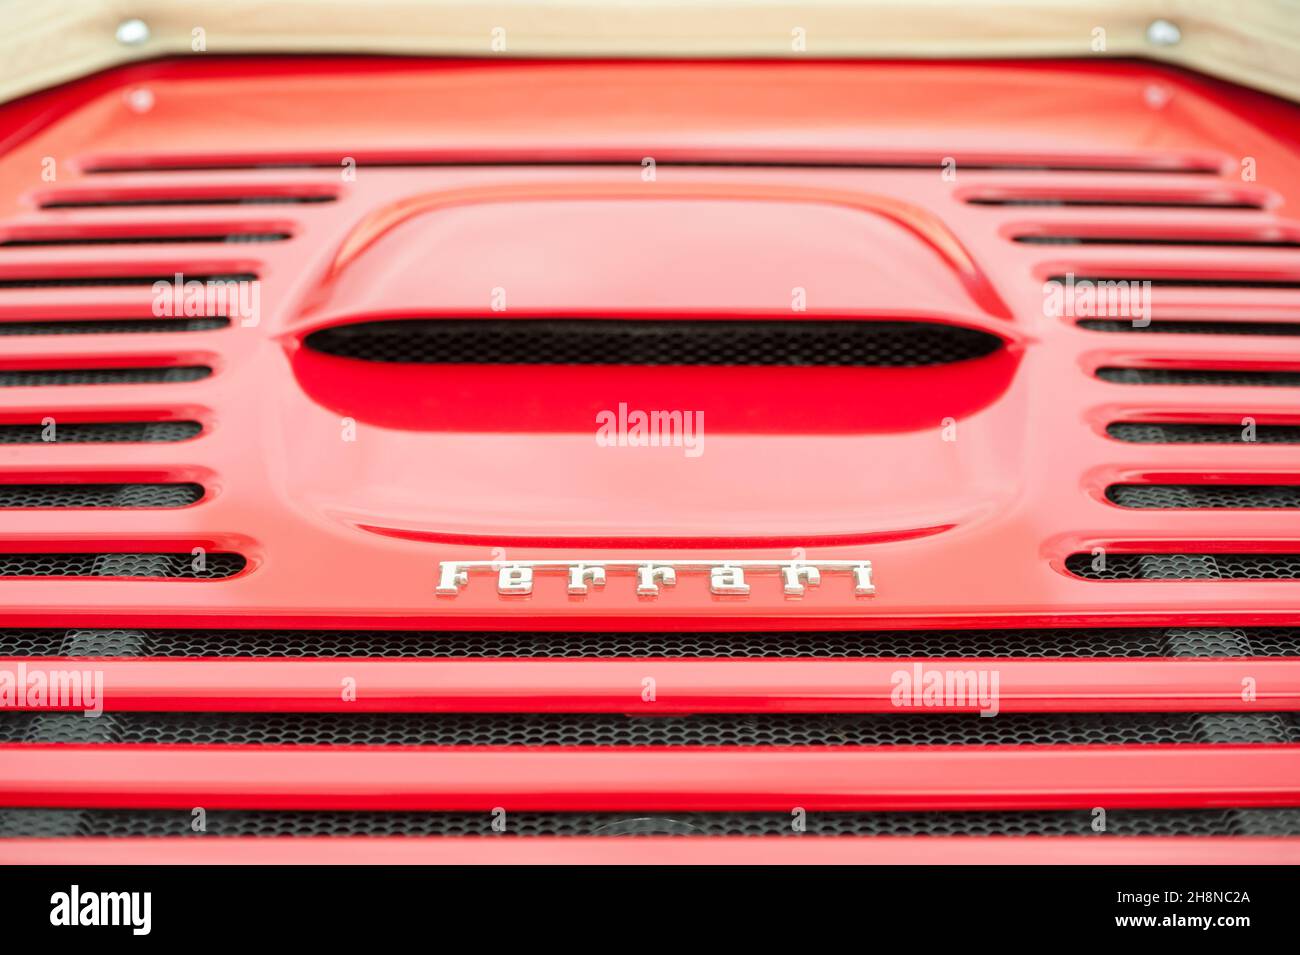 Engine cover close-up on a red Ferrari sports car in Yateley, UK on August 30, 2021 Stock Photo